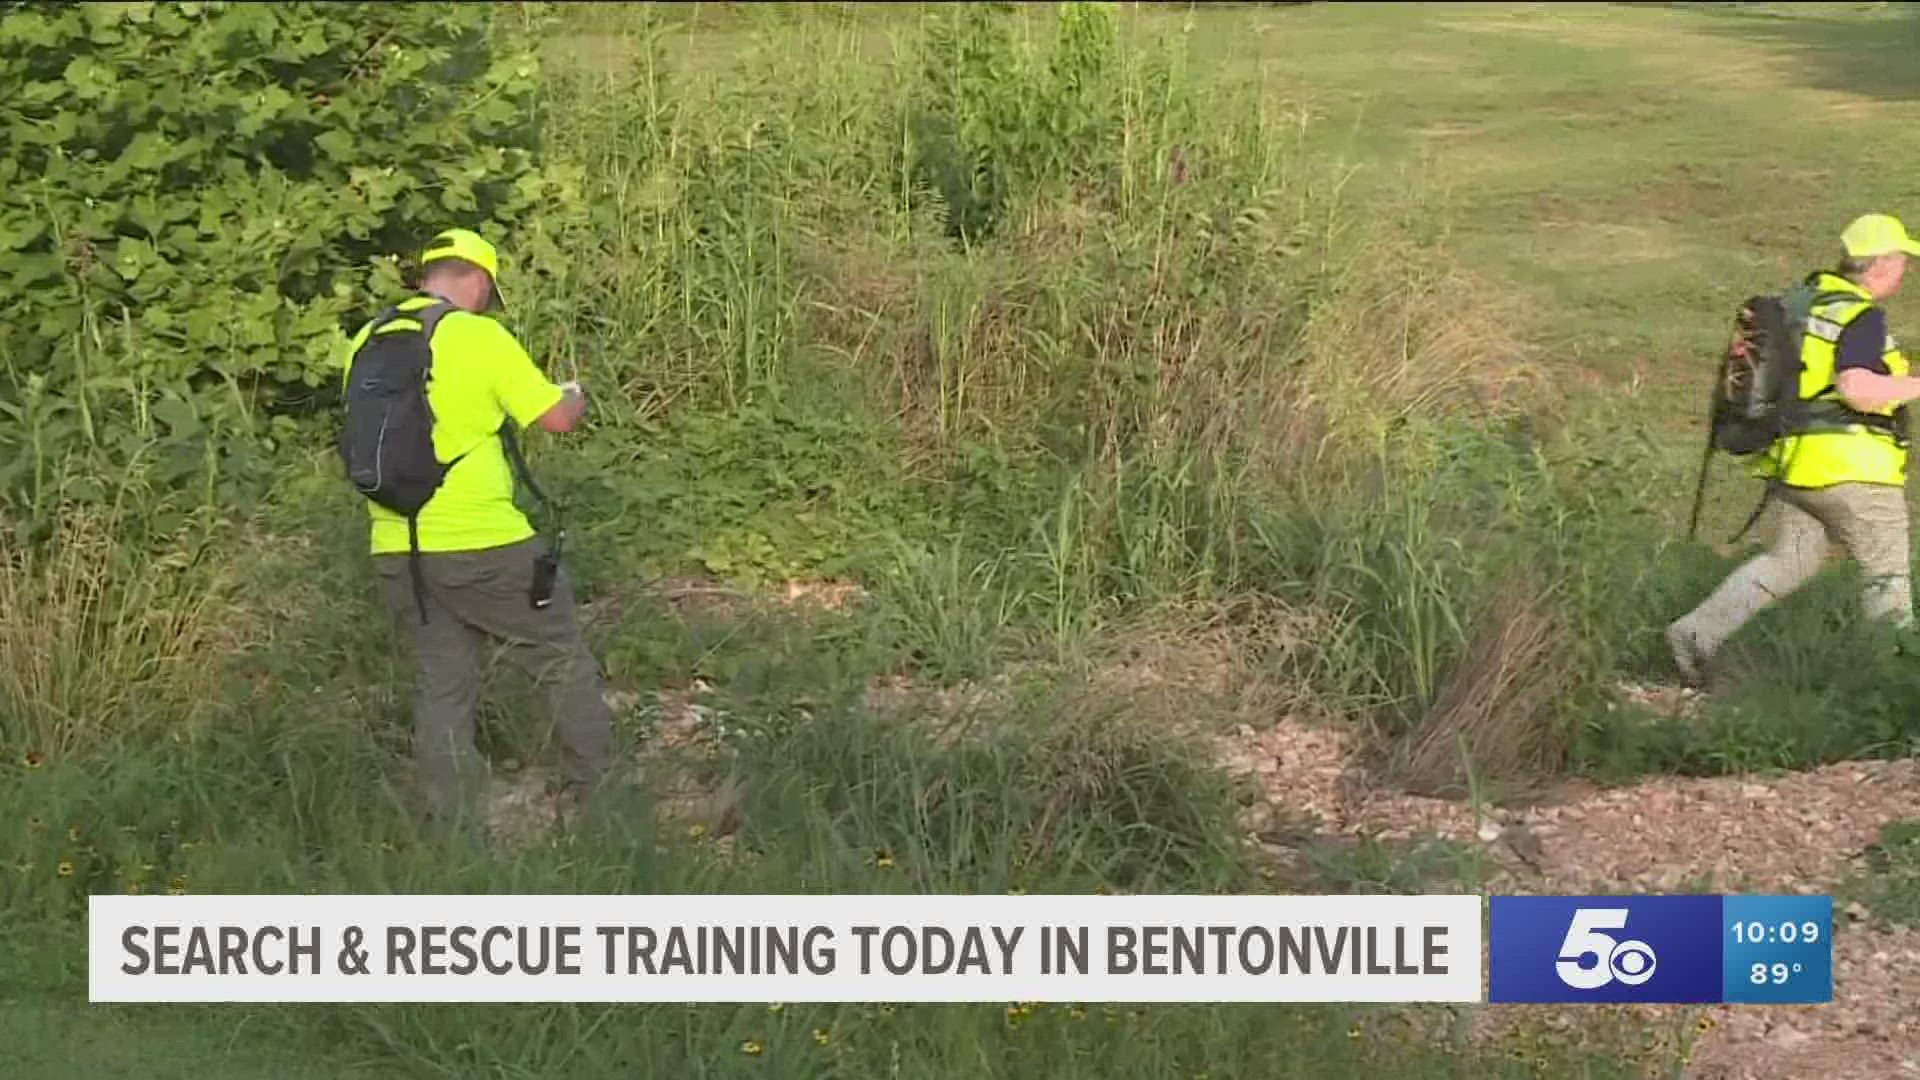 In Bentonville, the Benton County Search and Rescue held a mock search to help train volunteers on how to find missing people.